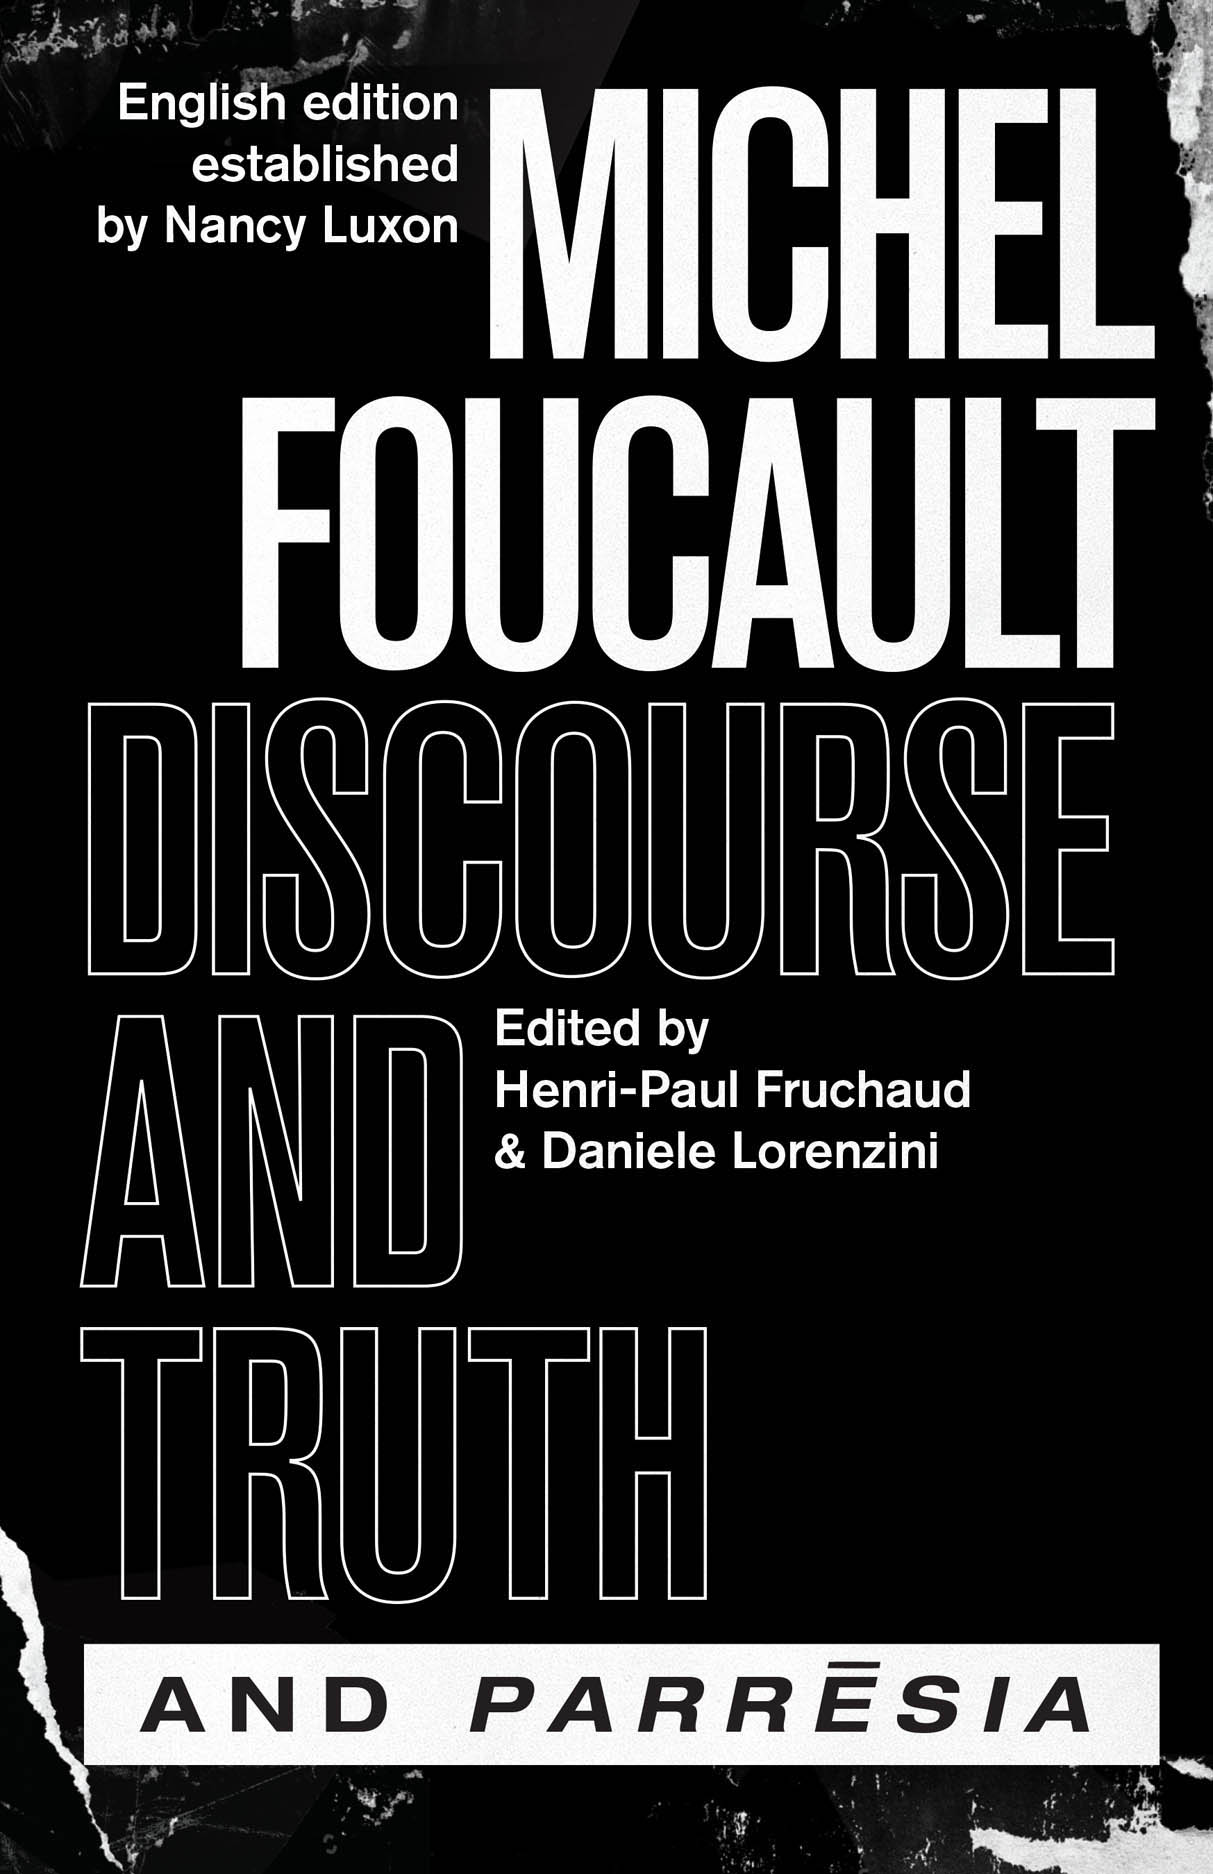 "Discourse and Truth" and "Parresia" Couverture du livre